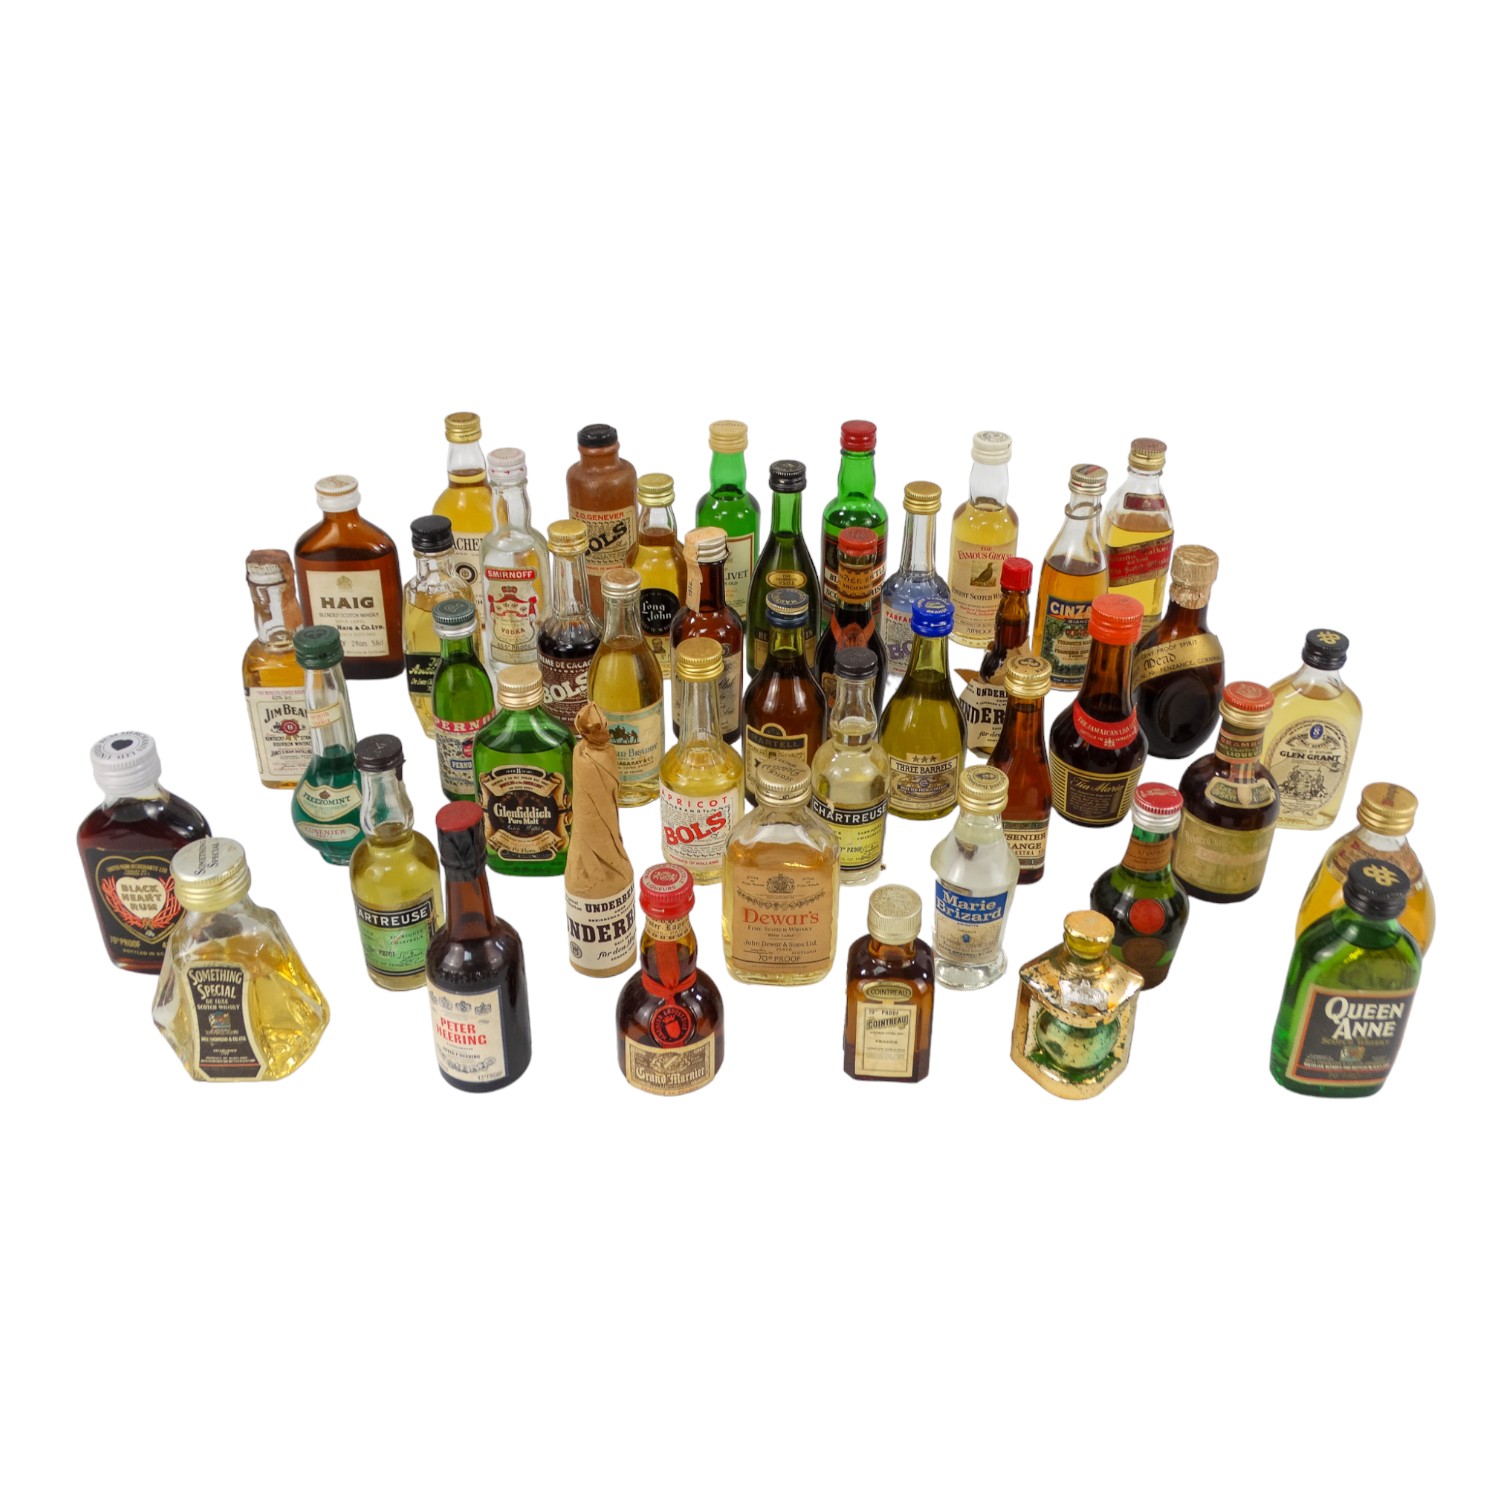 Forty-four miniature bottles of spirits - including some liqueurs.